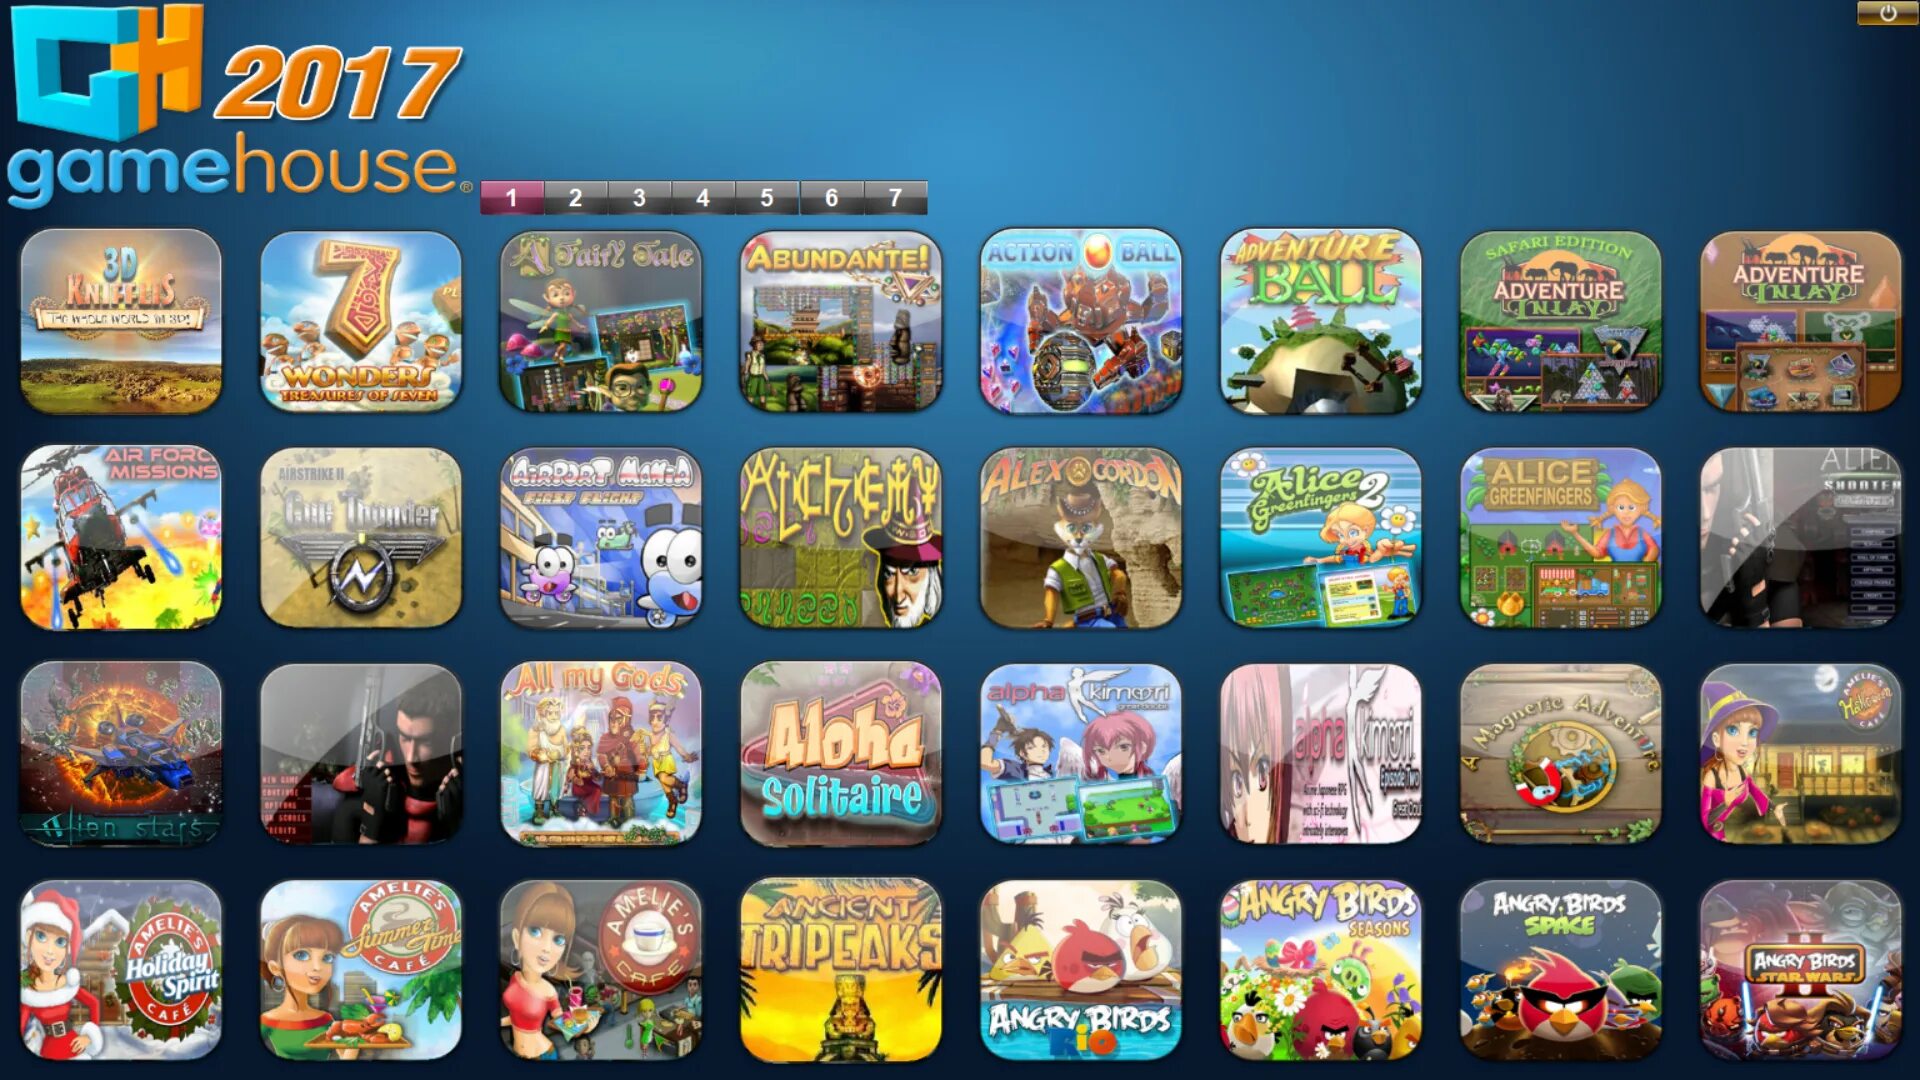 GAMEHOUSE игры. GAMEHOUSE games collection. Игры GAMEHOUSE Original stories. PC GAMEHOUSE. Download games house